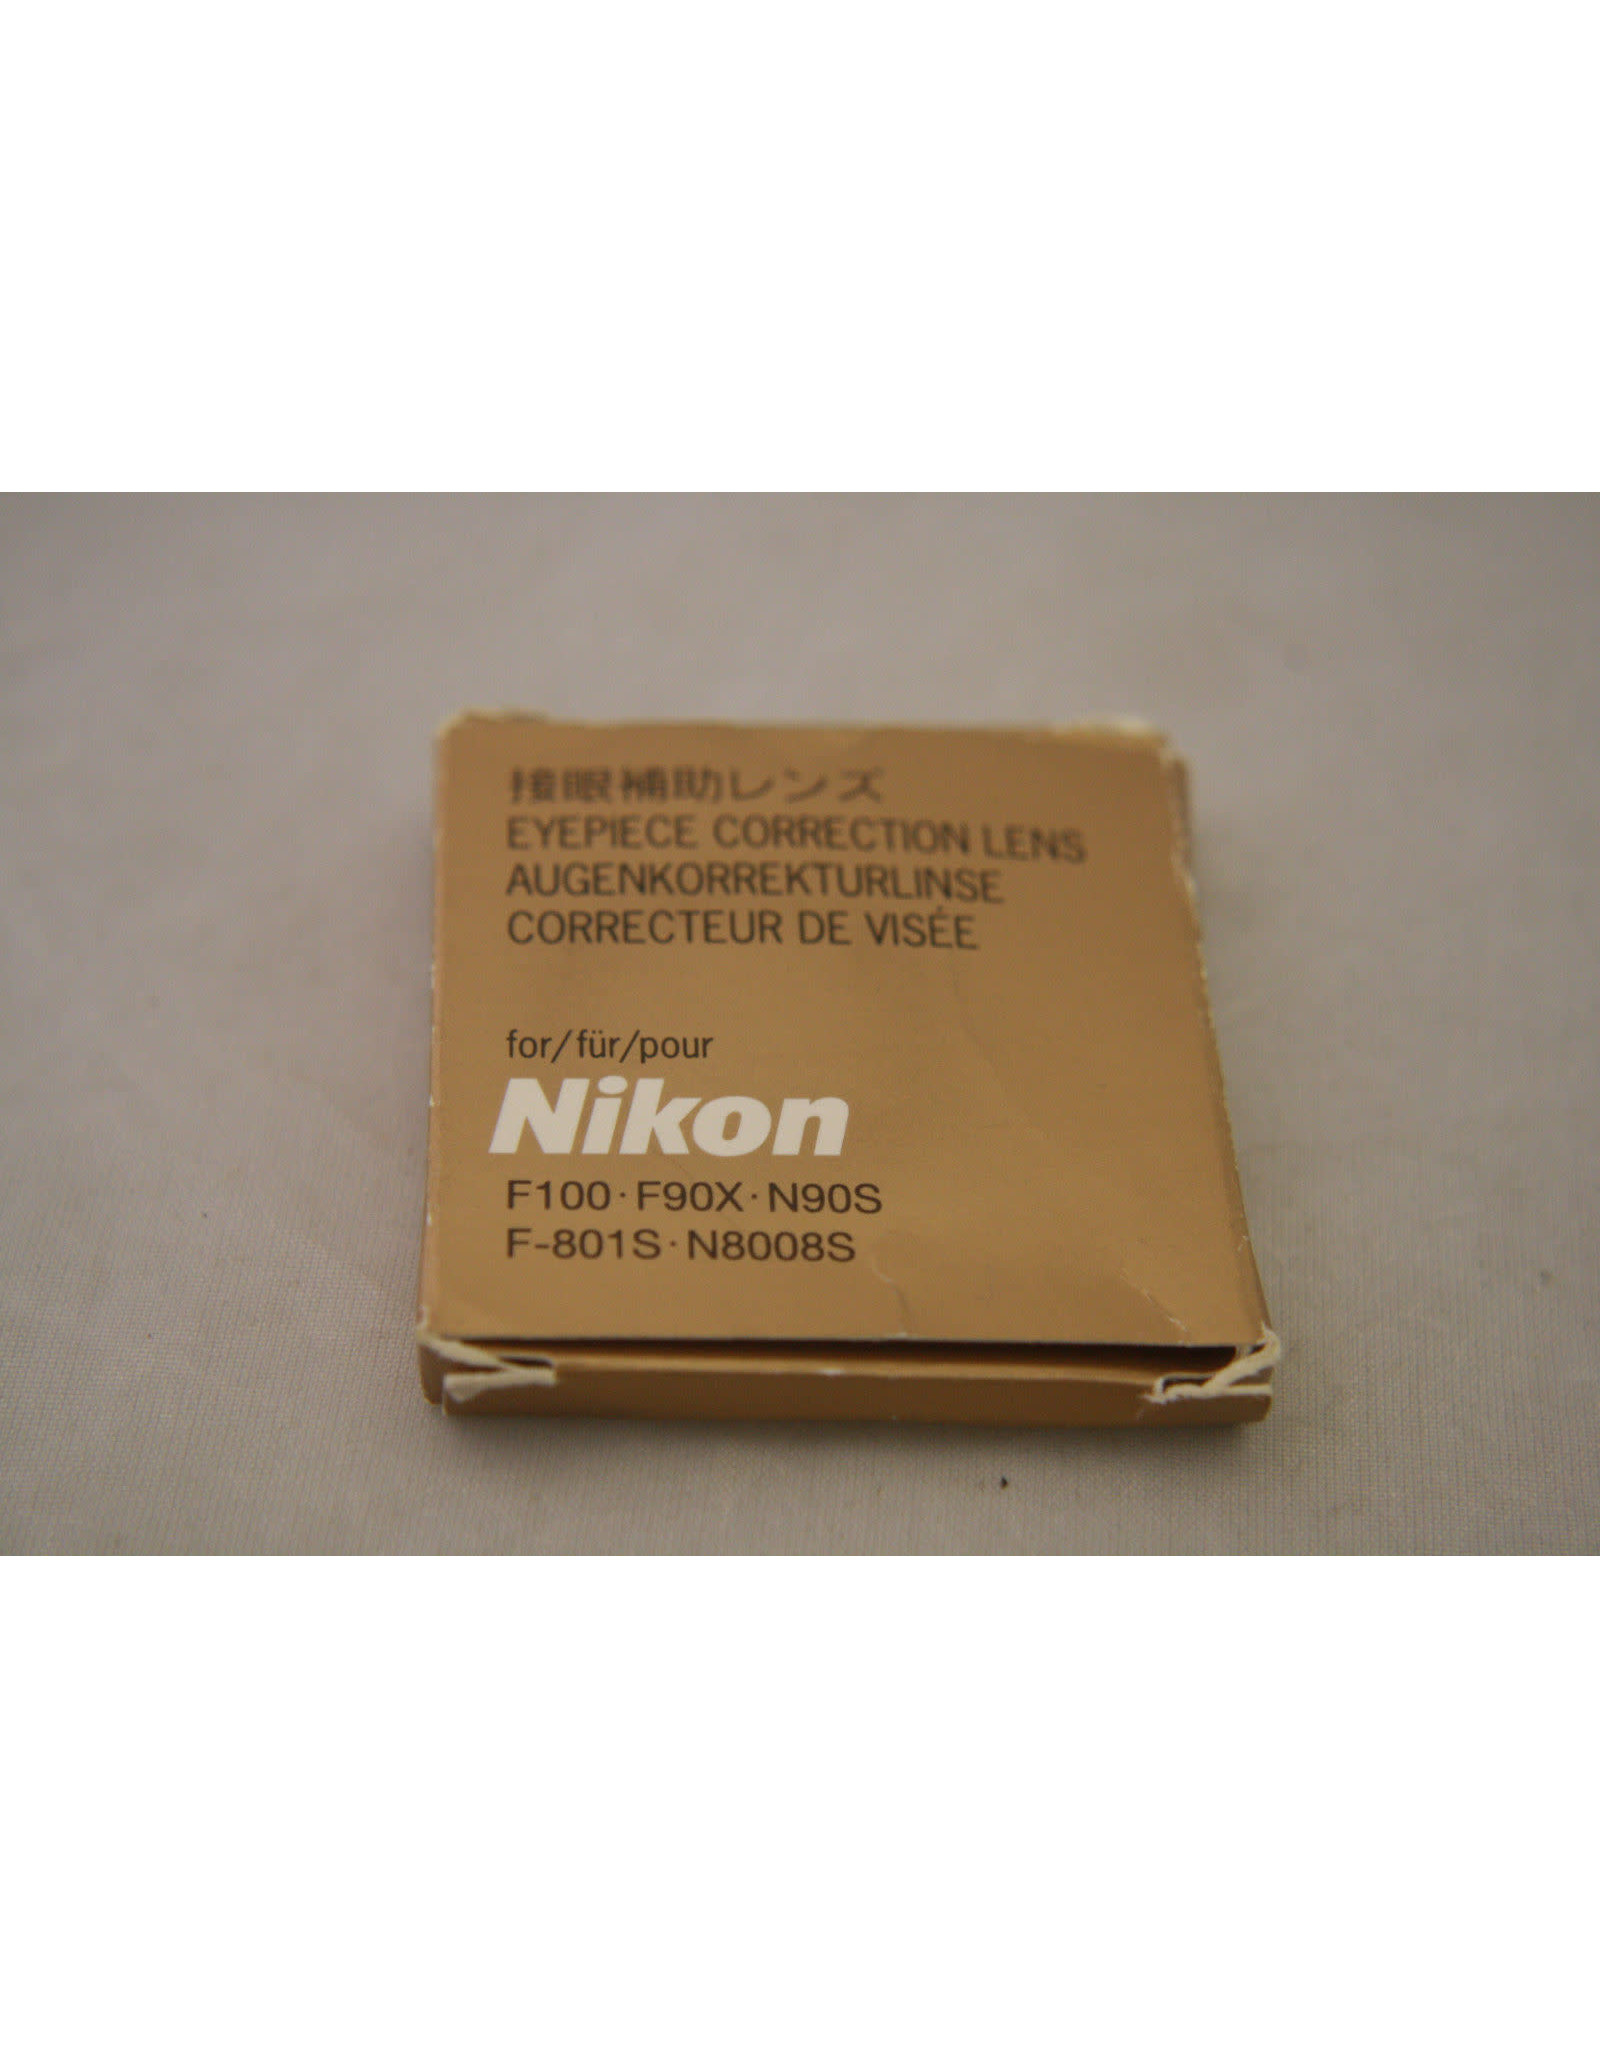 Nikon +1.0 Eyepiece Correction Lens for F100 F90x N90s F-801s and N8008s